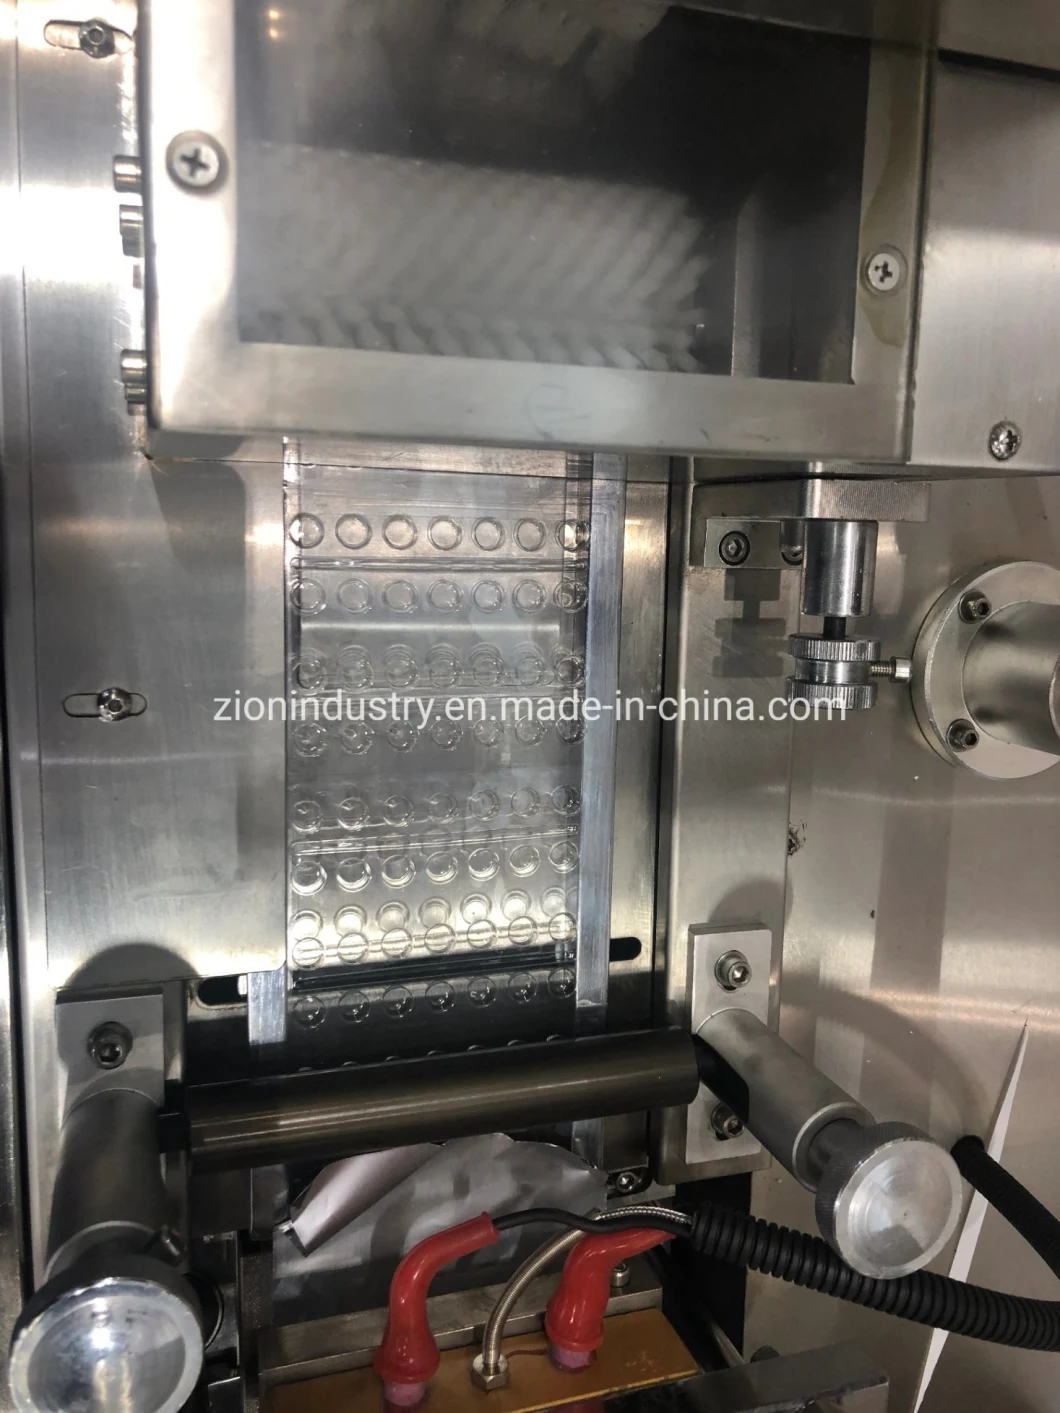 China Supplier Dpp80 Small Blister Packing Machine, Pharmacy Tablet Capsule Blister Packing Machine